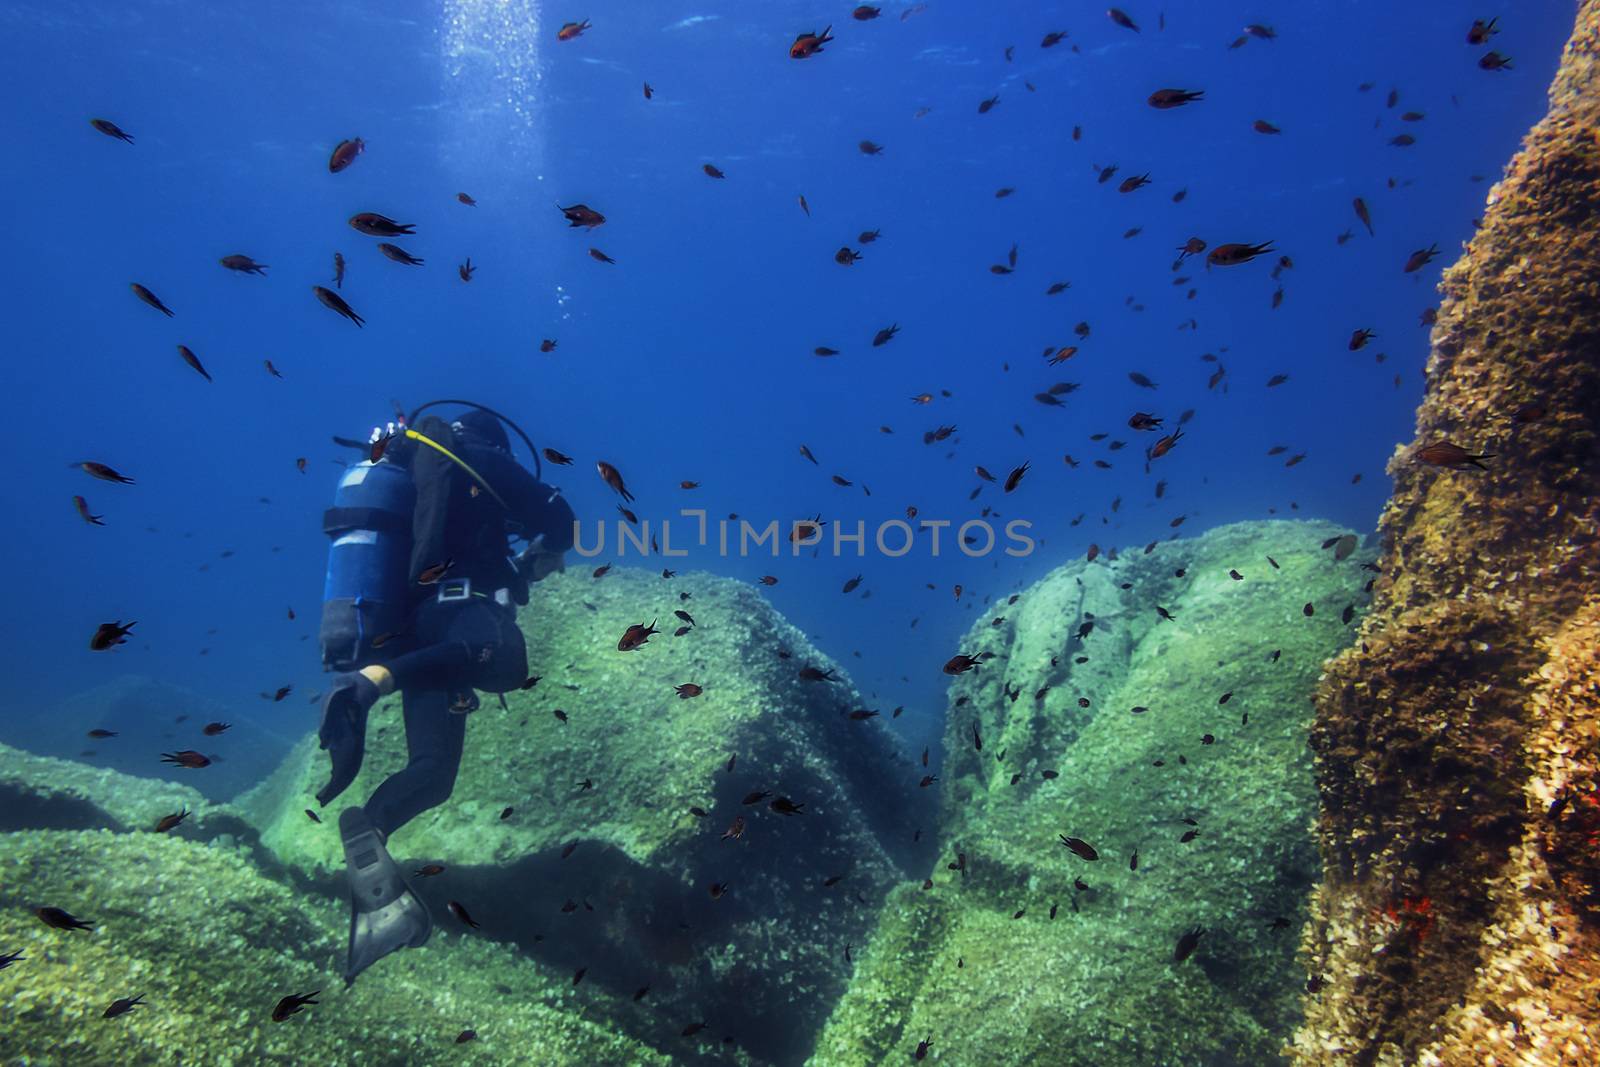 person diving near the rocky seafloor that is covered in small green algae, a school of red fishes swim around it and the bubbles of his breath rise through the blue water